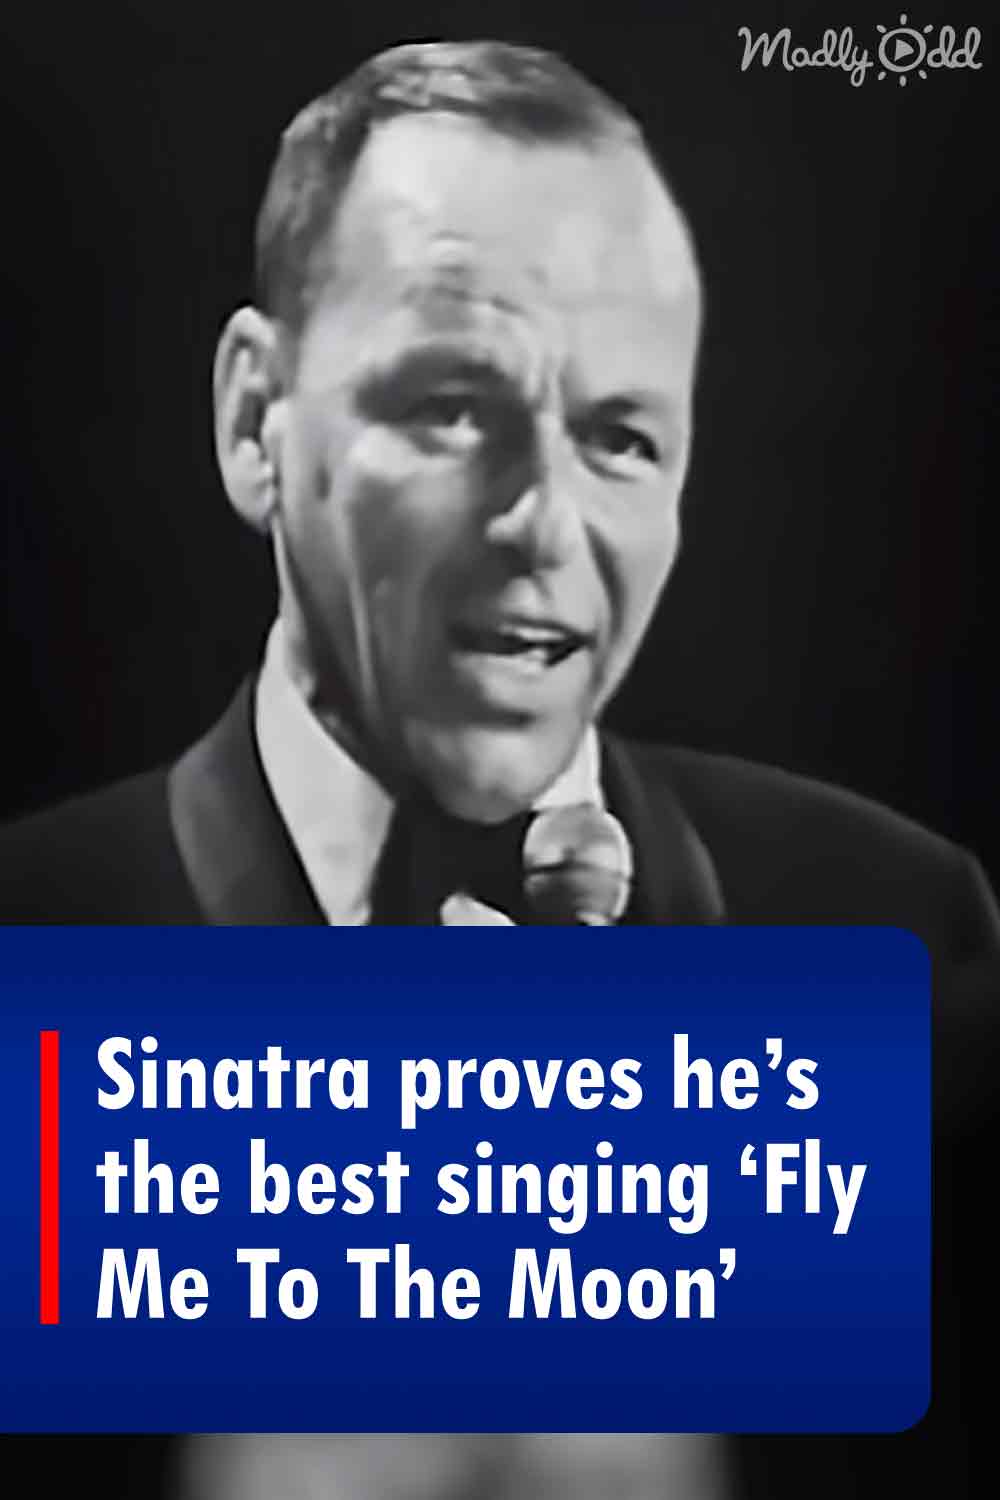 Sinatra proves he’s the best singing ‘Fly Me To The Moon’